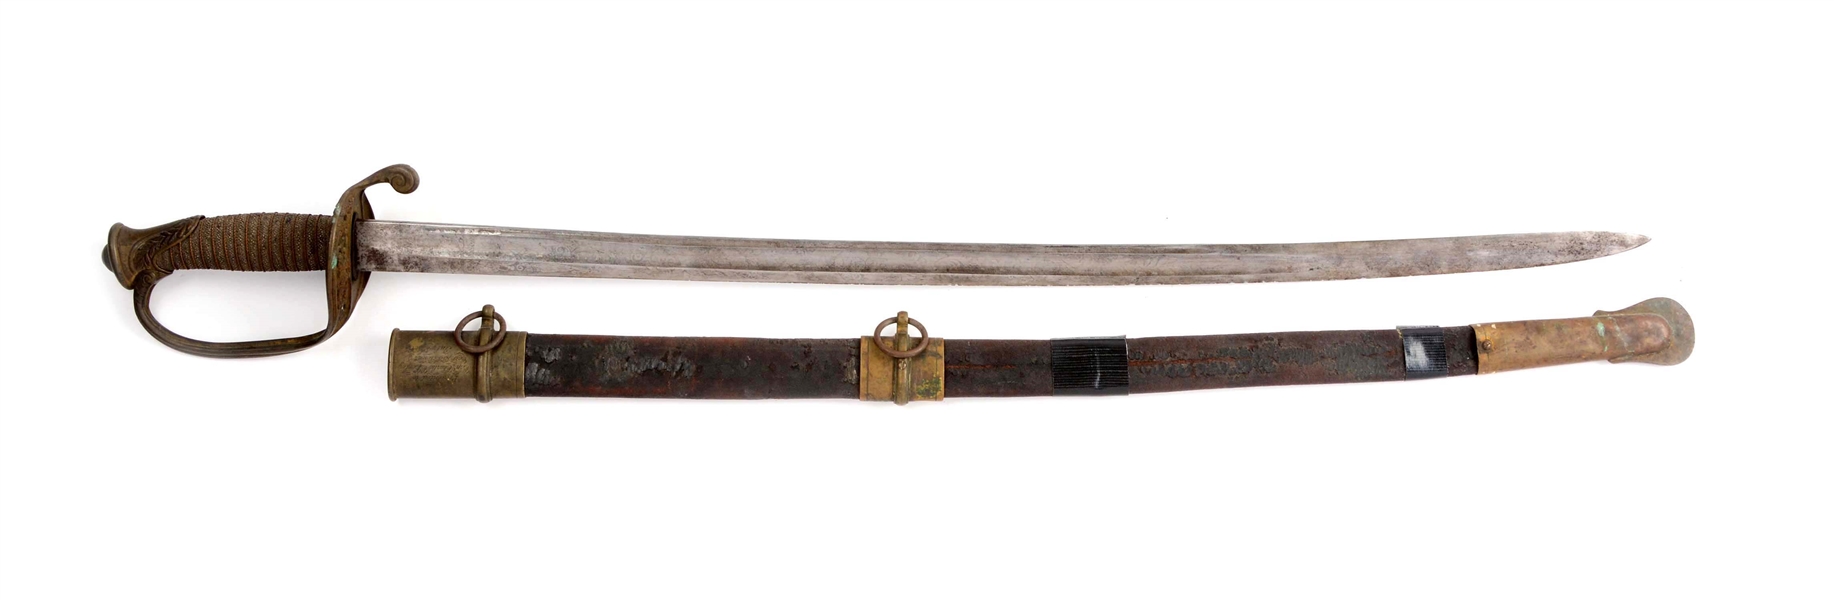 SCARCE U.S. MODEL 1850 FOOT OFFICERS SWORD BY MINTZER PRESENTED TO CAPTAIN CHARLES CONLEY, 133RD PENNSYLVANIA VOLUNTEERS ON JULY 4, 1862.